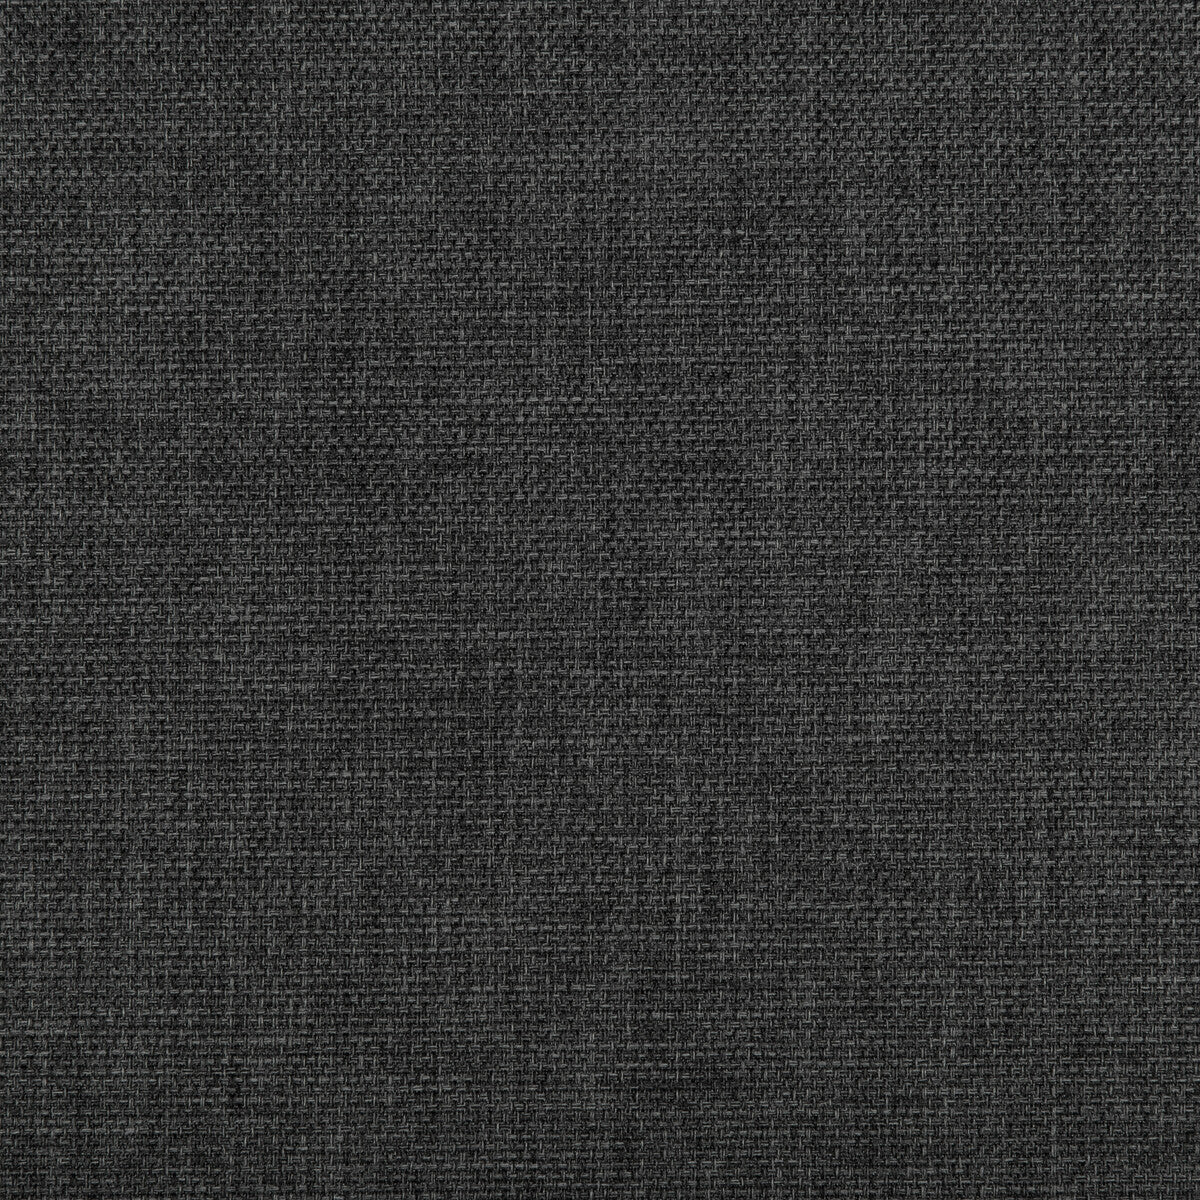 Kravet Contract fabric in 4645-21 color - pattern 4645.21.0 - by Kravet Contract